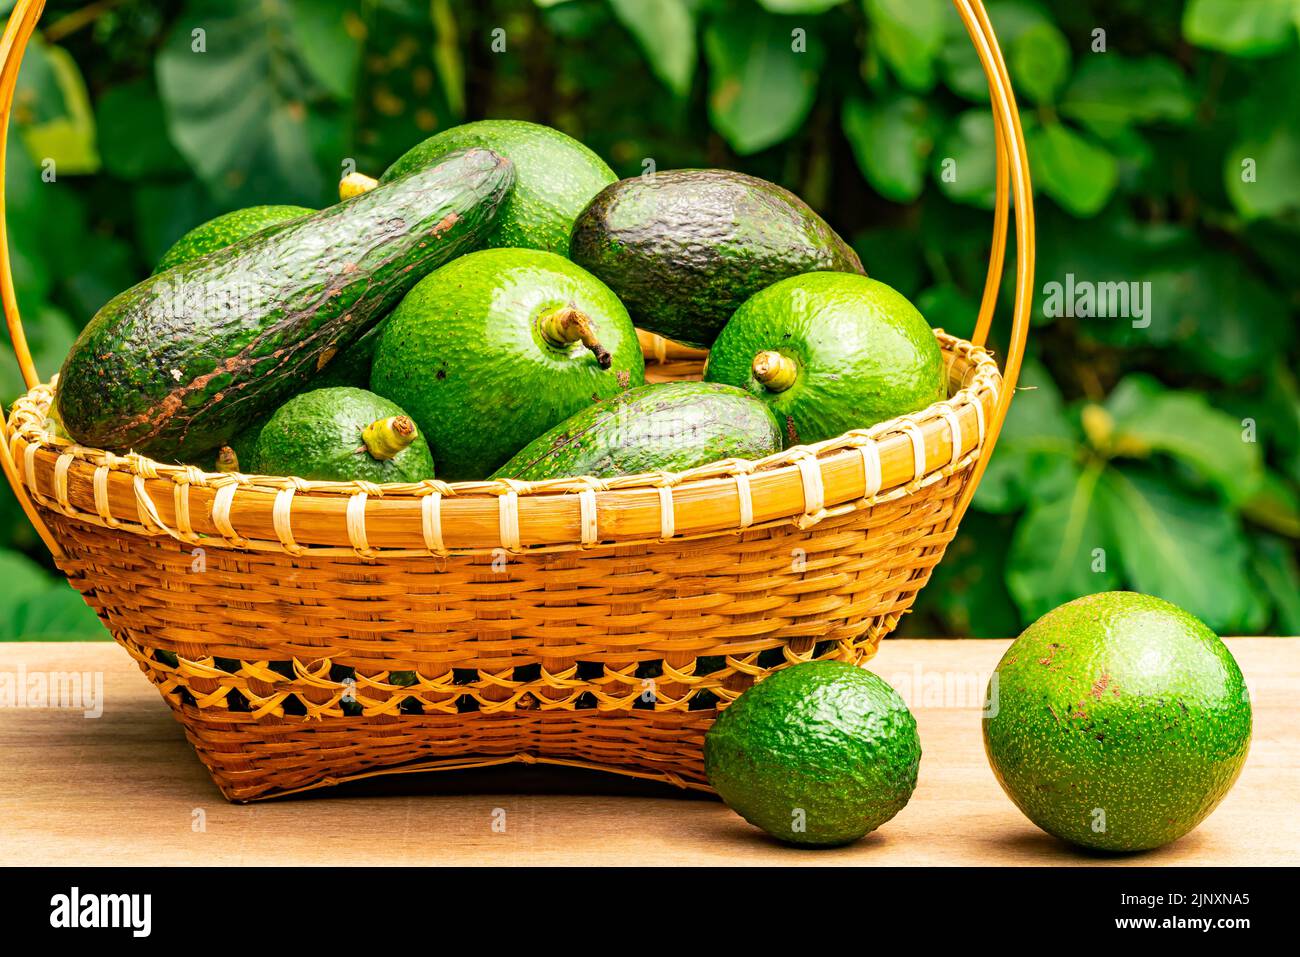 Closeup view of different varieties of avocado in bamboo basket and on a wooden table infront of teak forest. Stock Photo